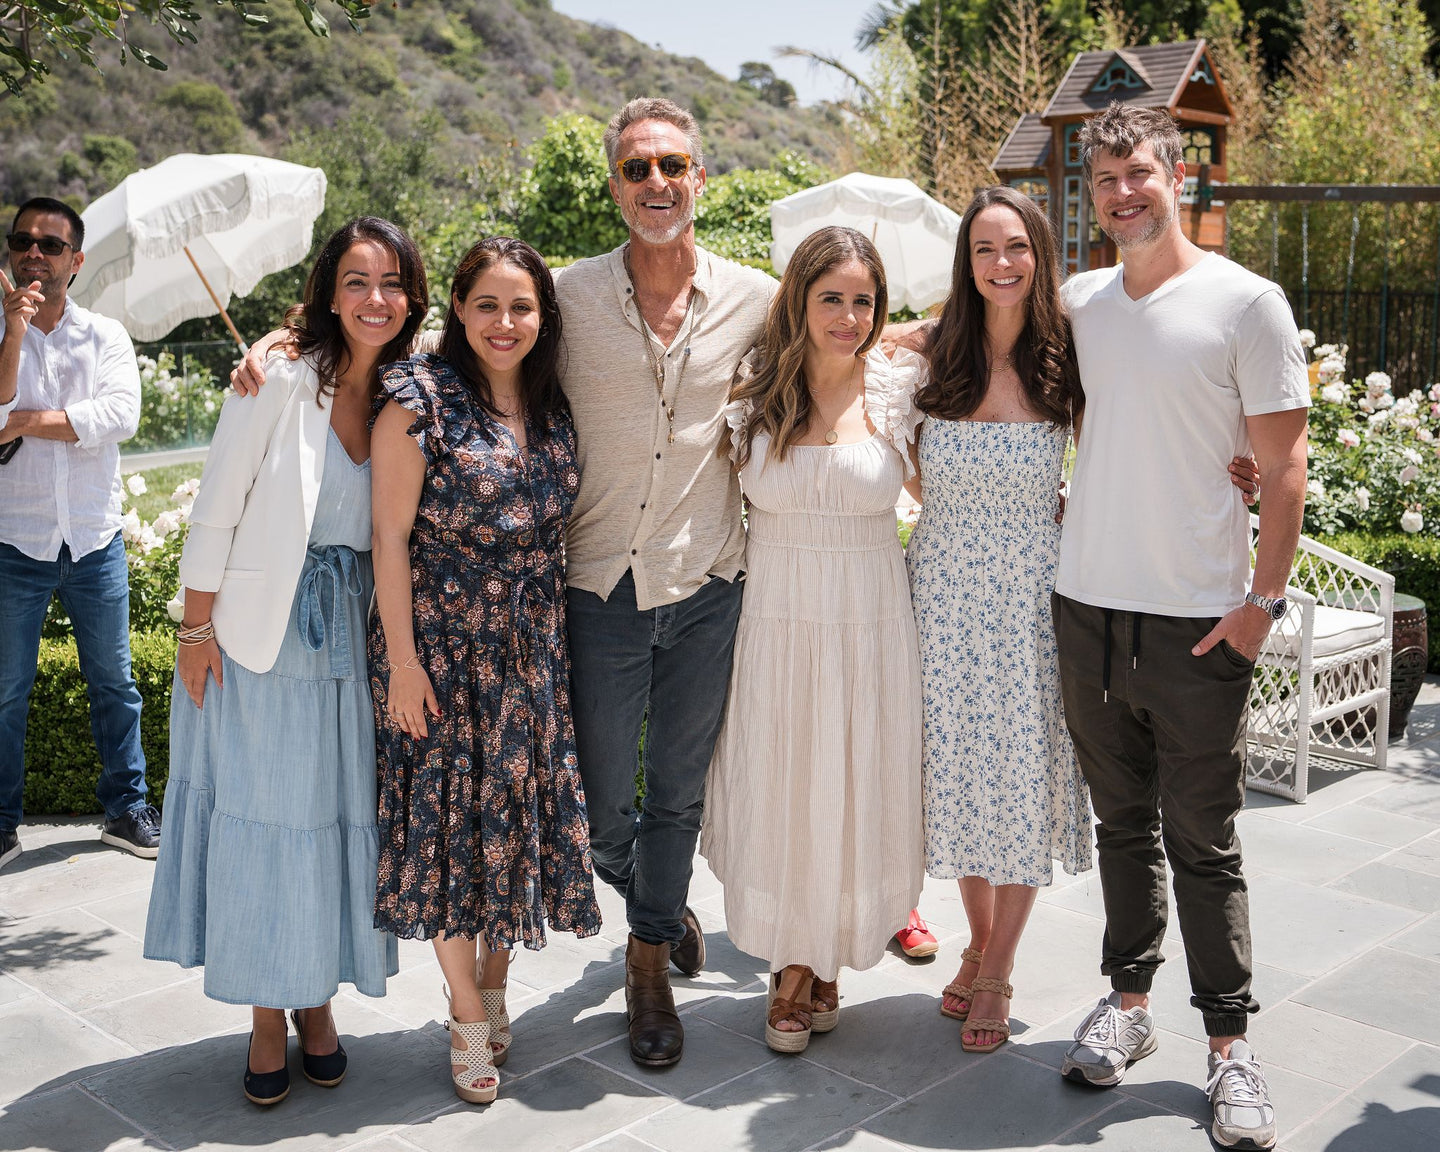 group photo of four girls and 2 guys situated in a backyard with a greenery background. 1 guys was also caught in the background while the group photo was taken.